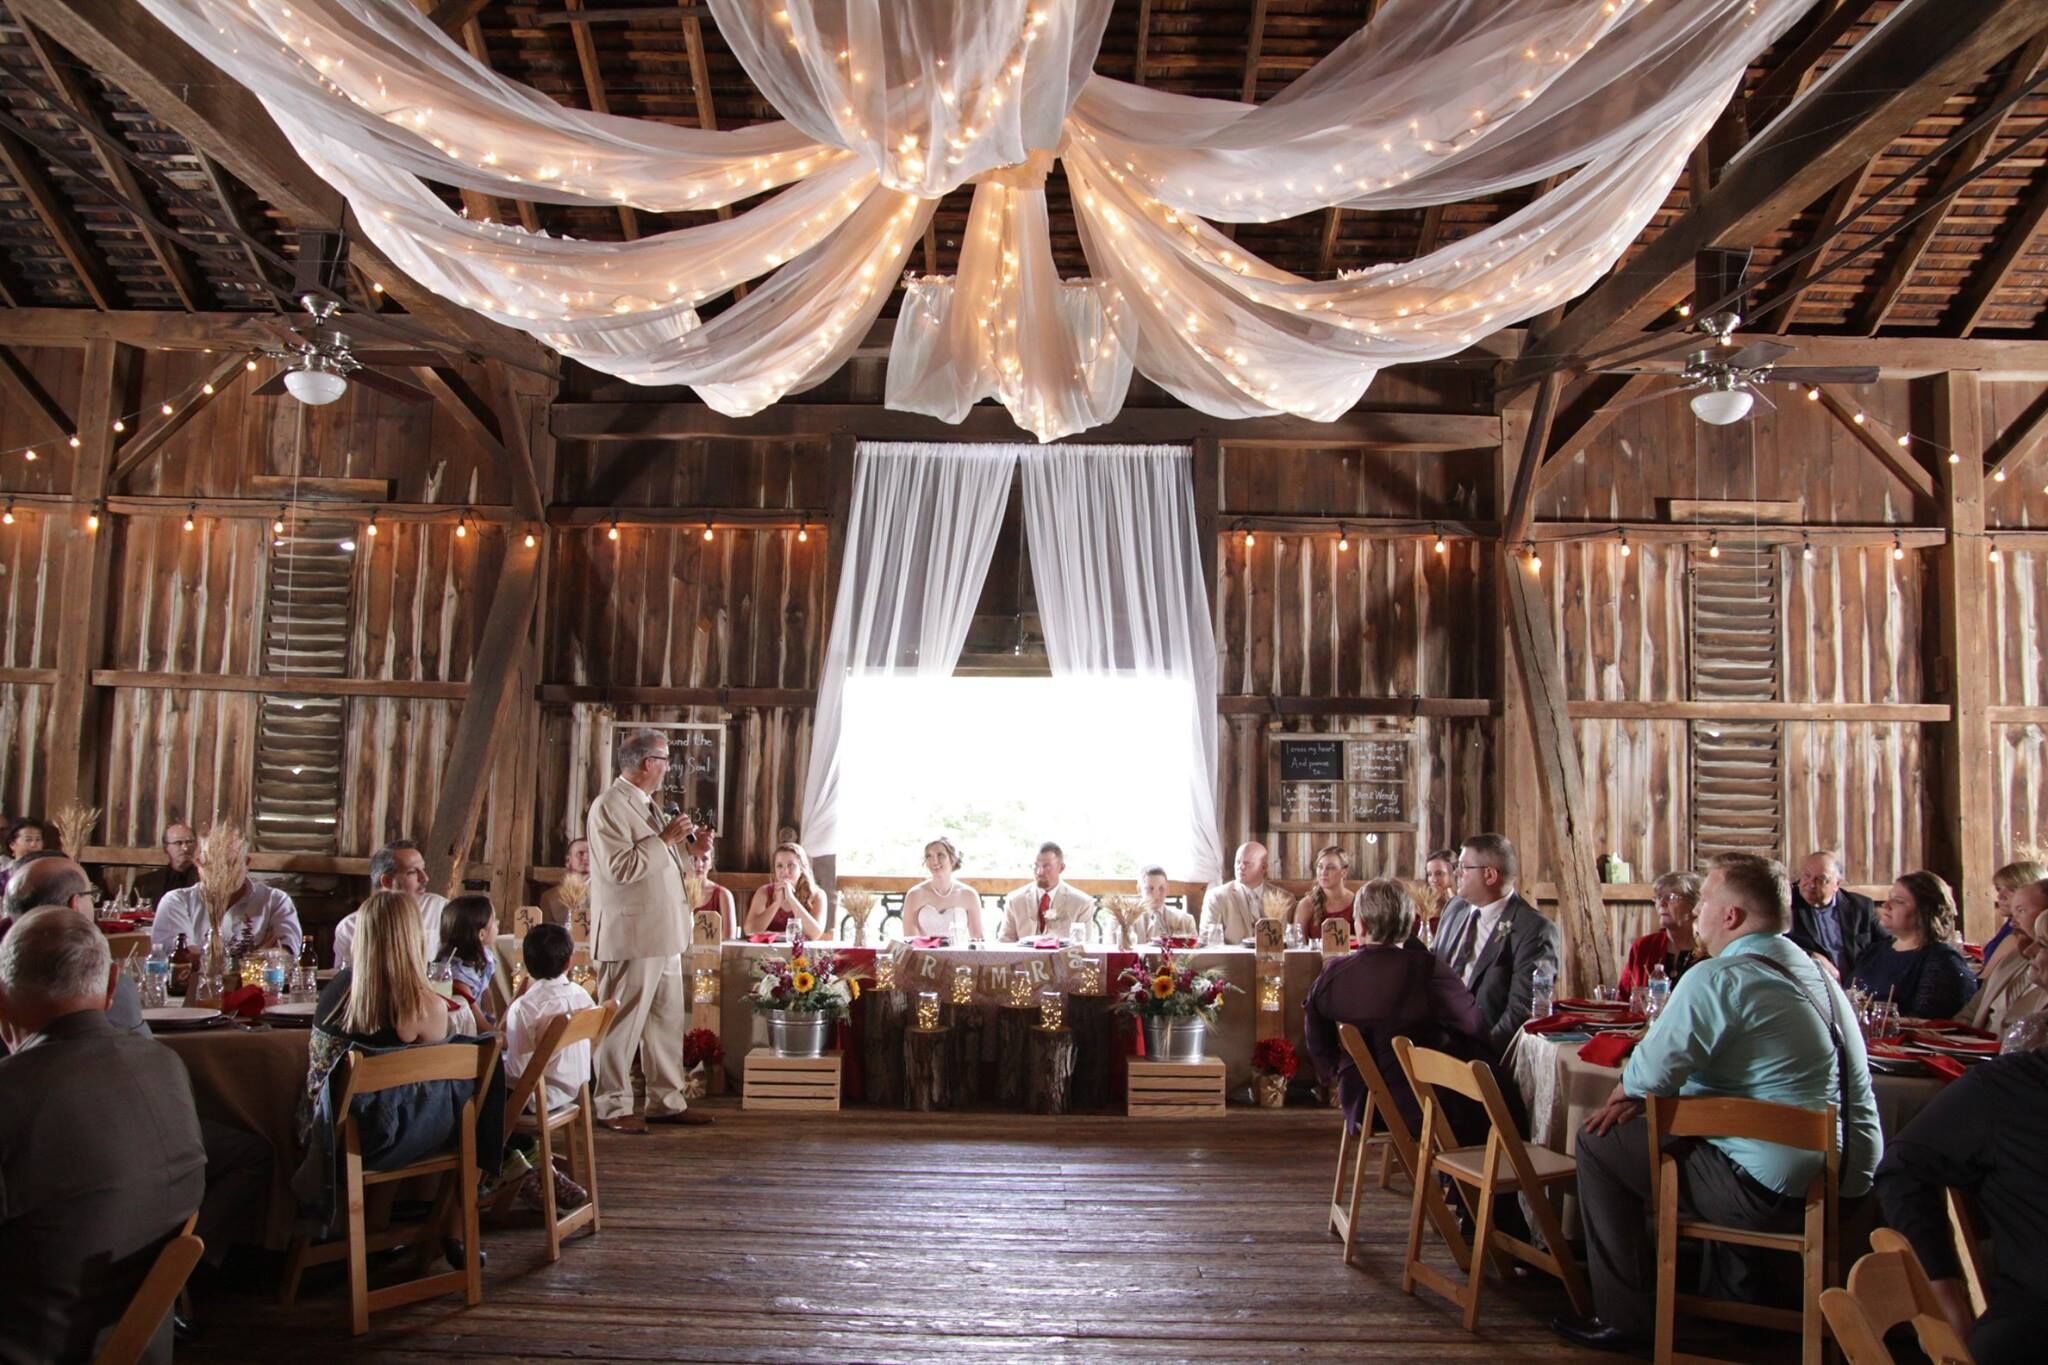 Amazing Barn Wedding Venues In Ohio of the decade The ultimate guide 